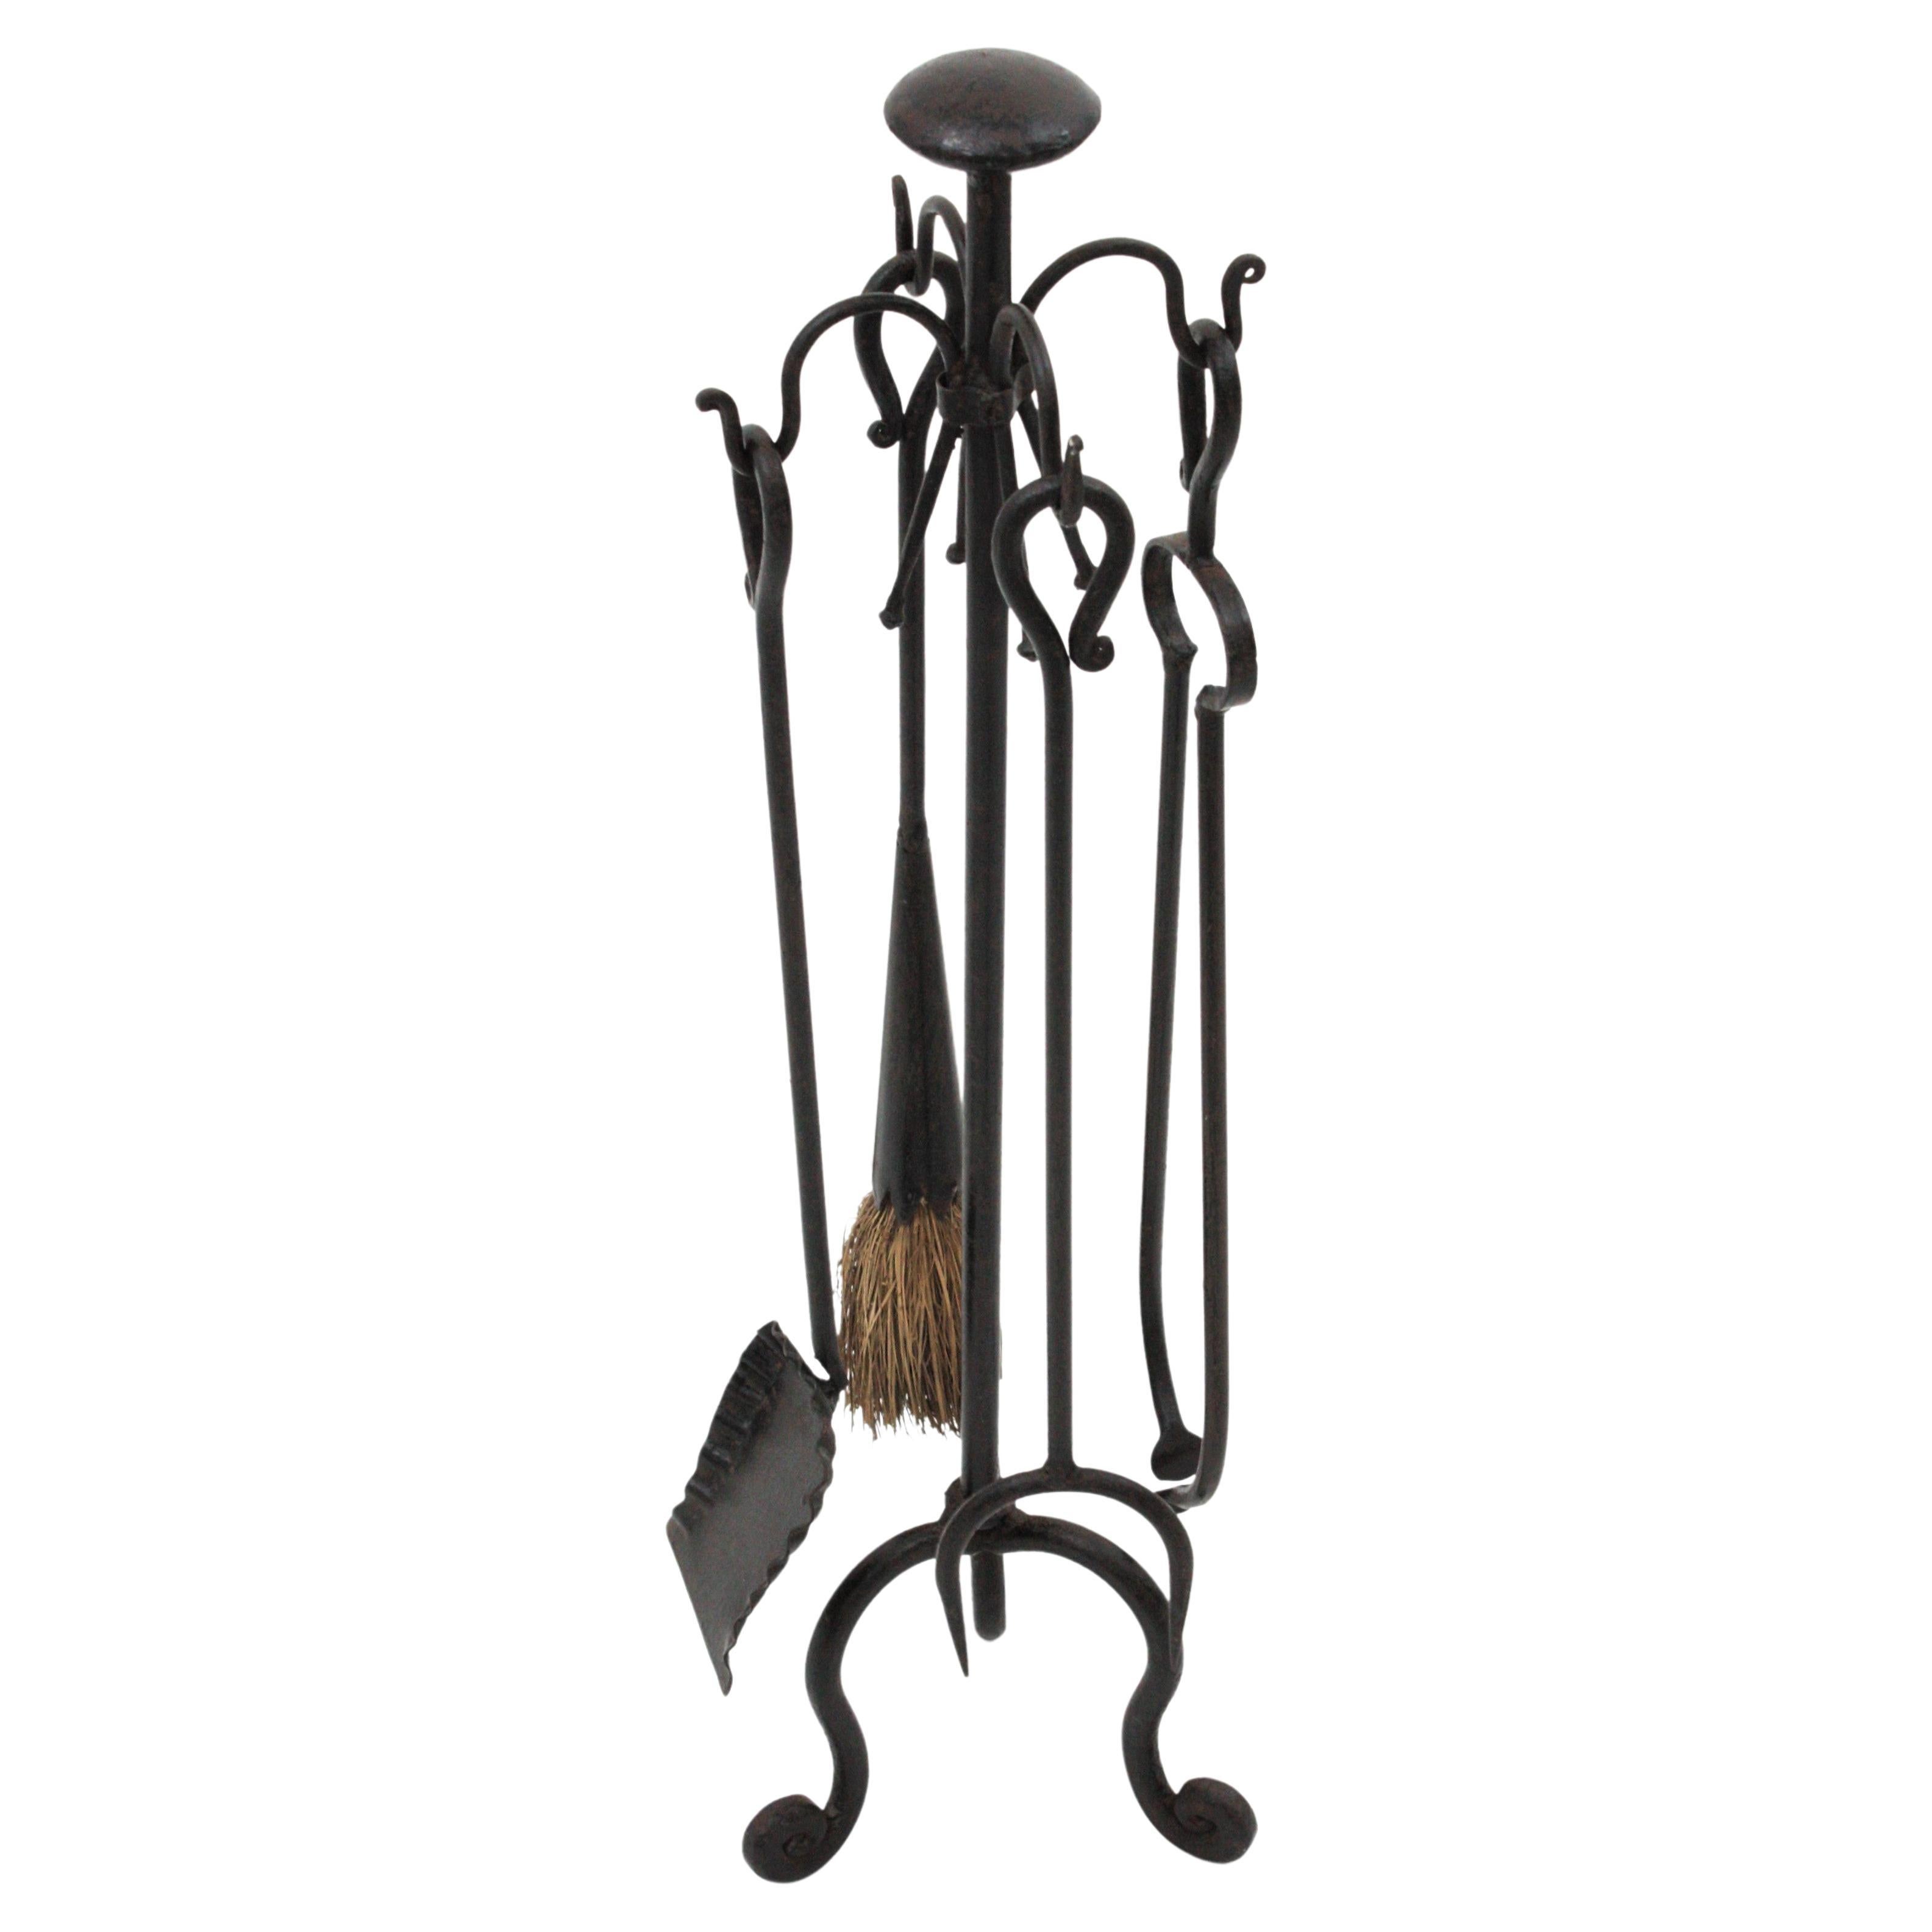  Spanish Gothic Revival Fireplace Tools Set Stand in Wrought Iron